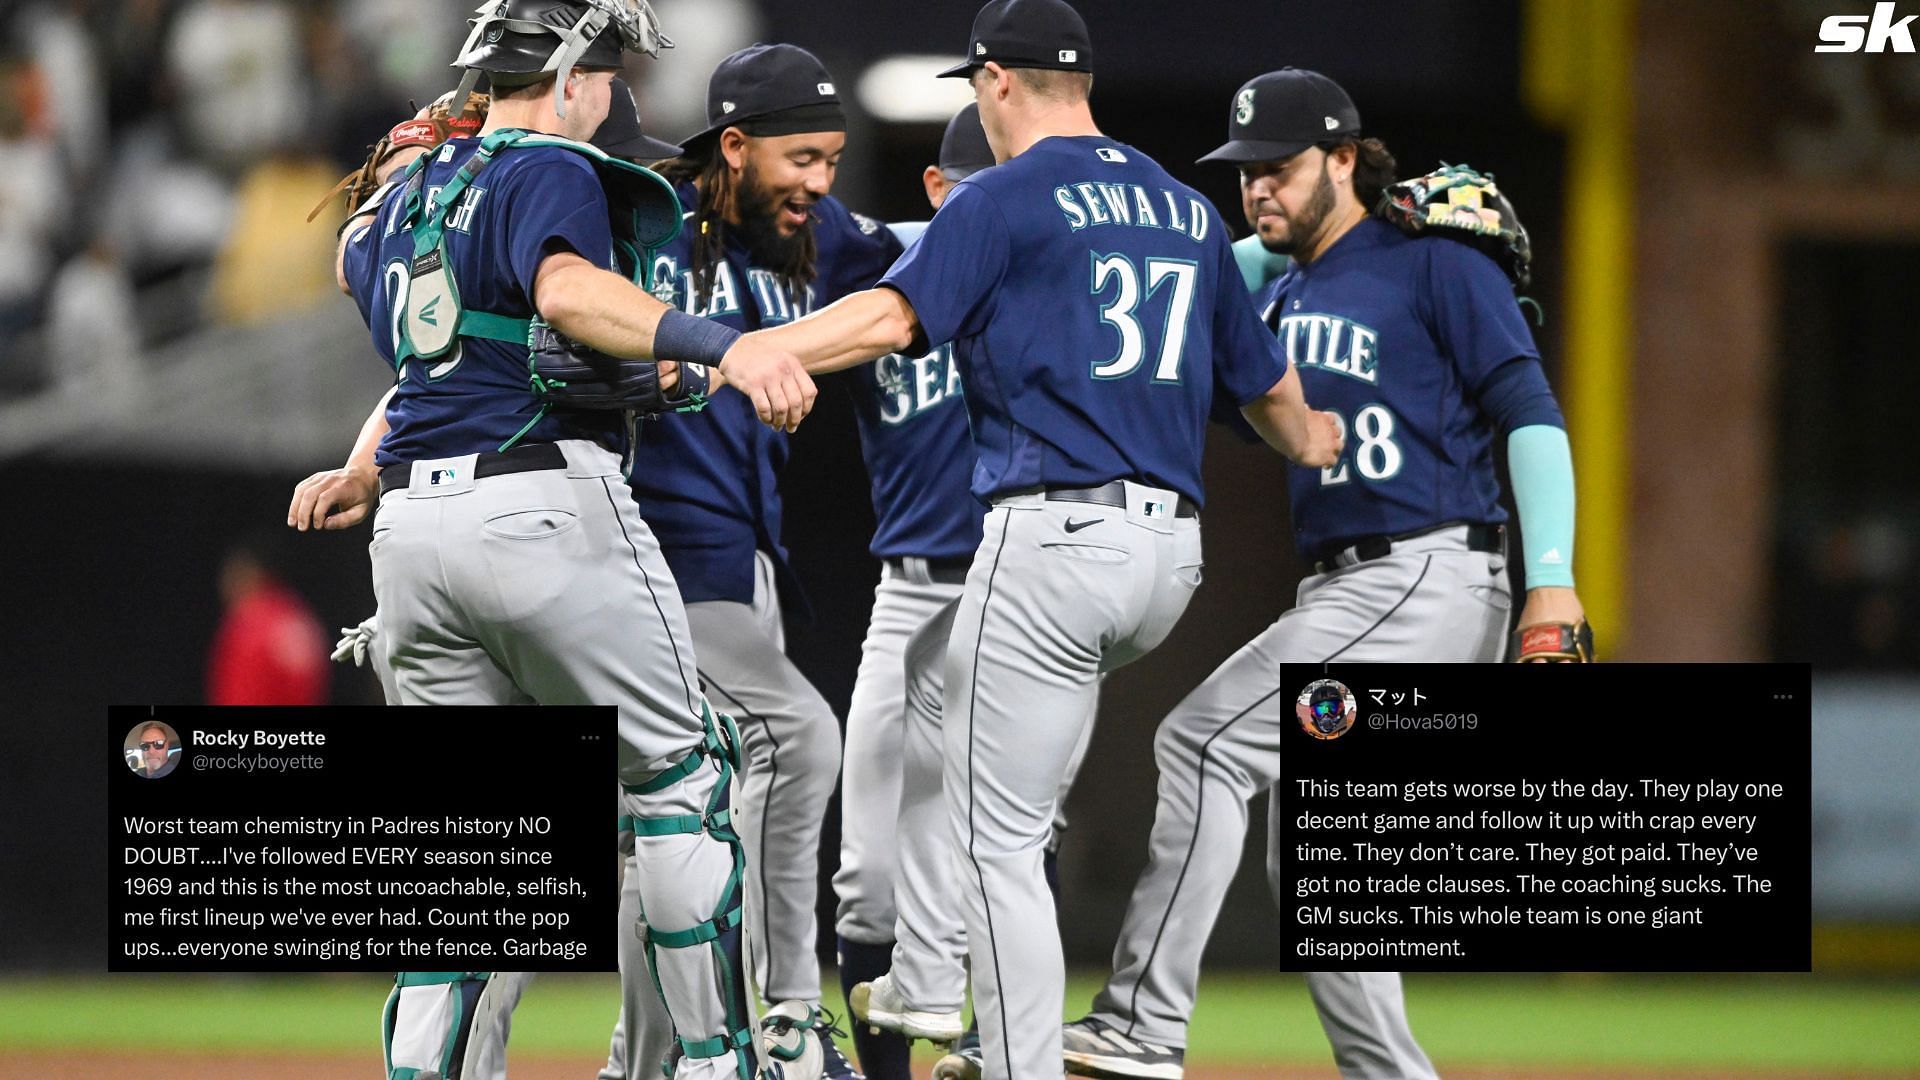 Padres fans furious after team's loss vs Mariners: Most